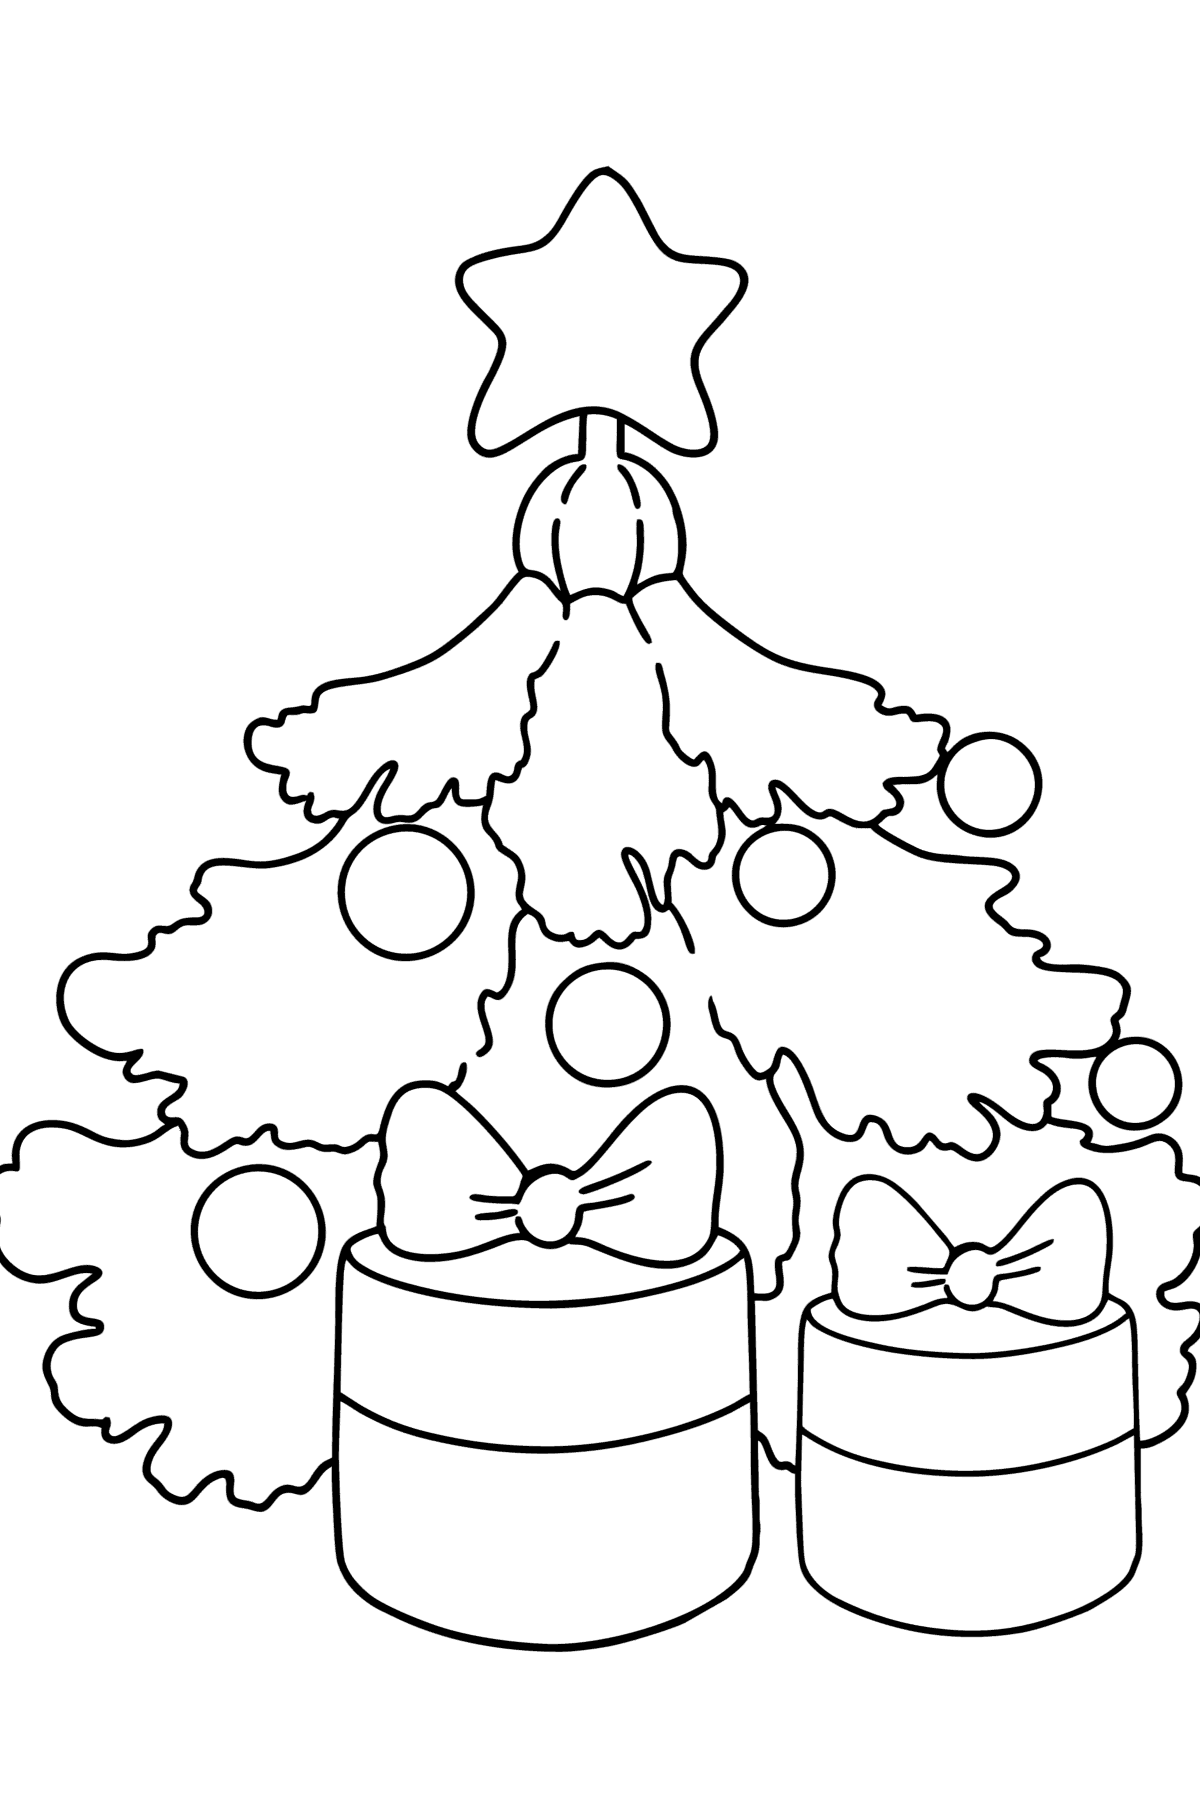 Christmas Tree and Gifts coloring page - Coloring Pages for Kids